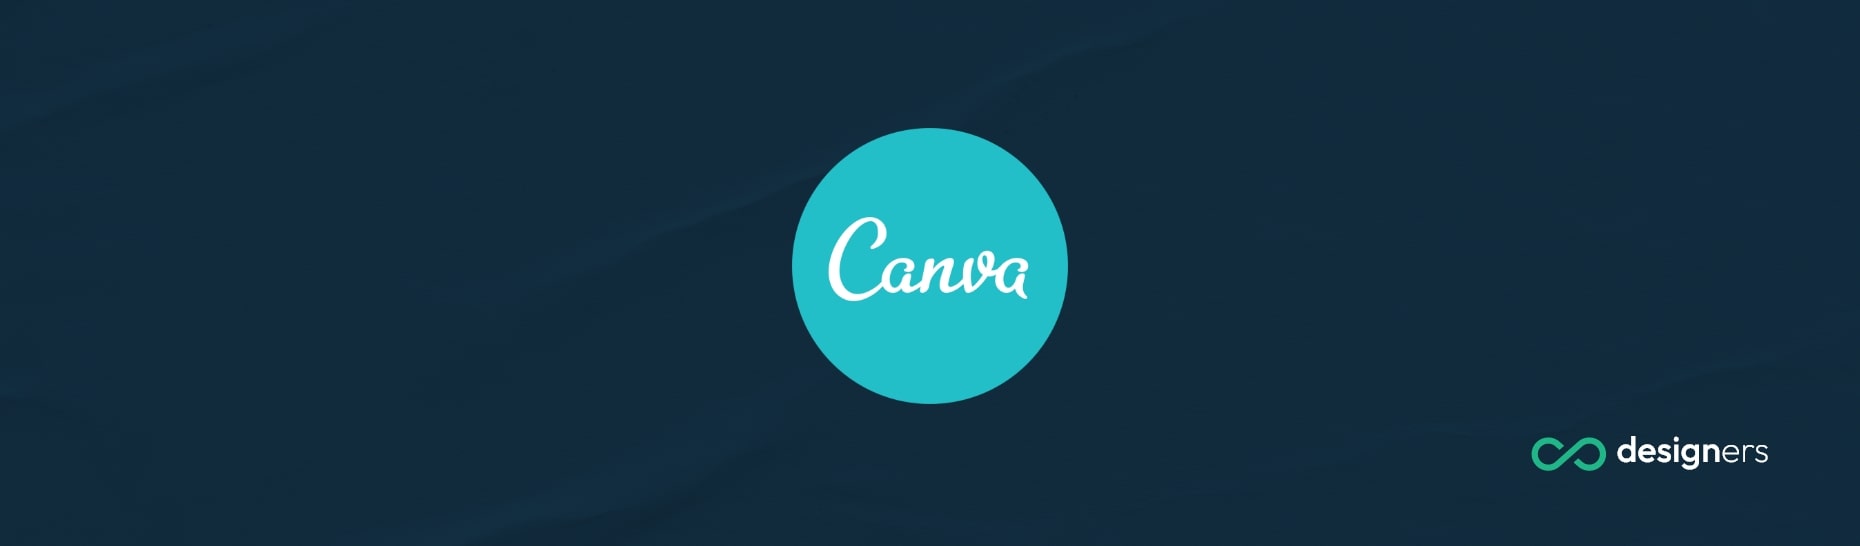 Which Adobe Program Is Like Canva?